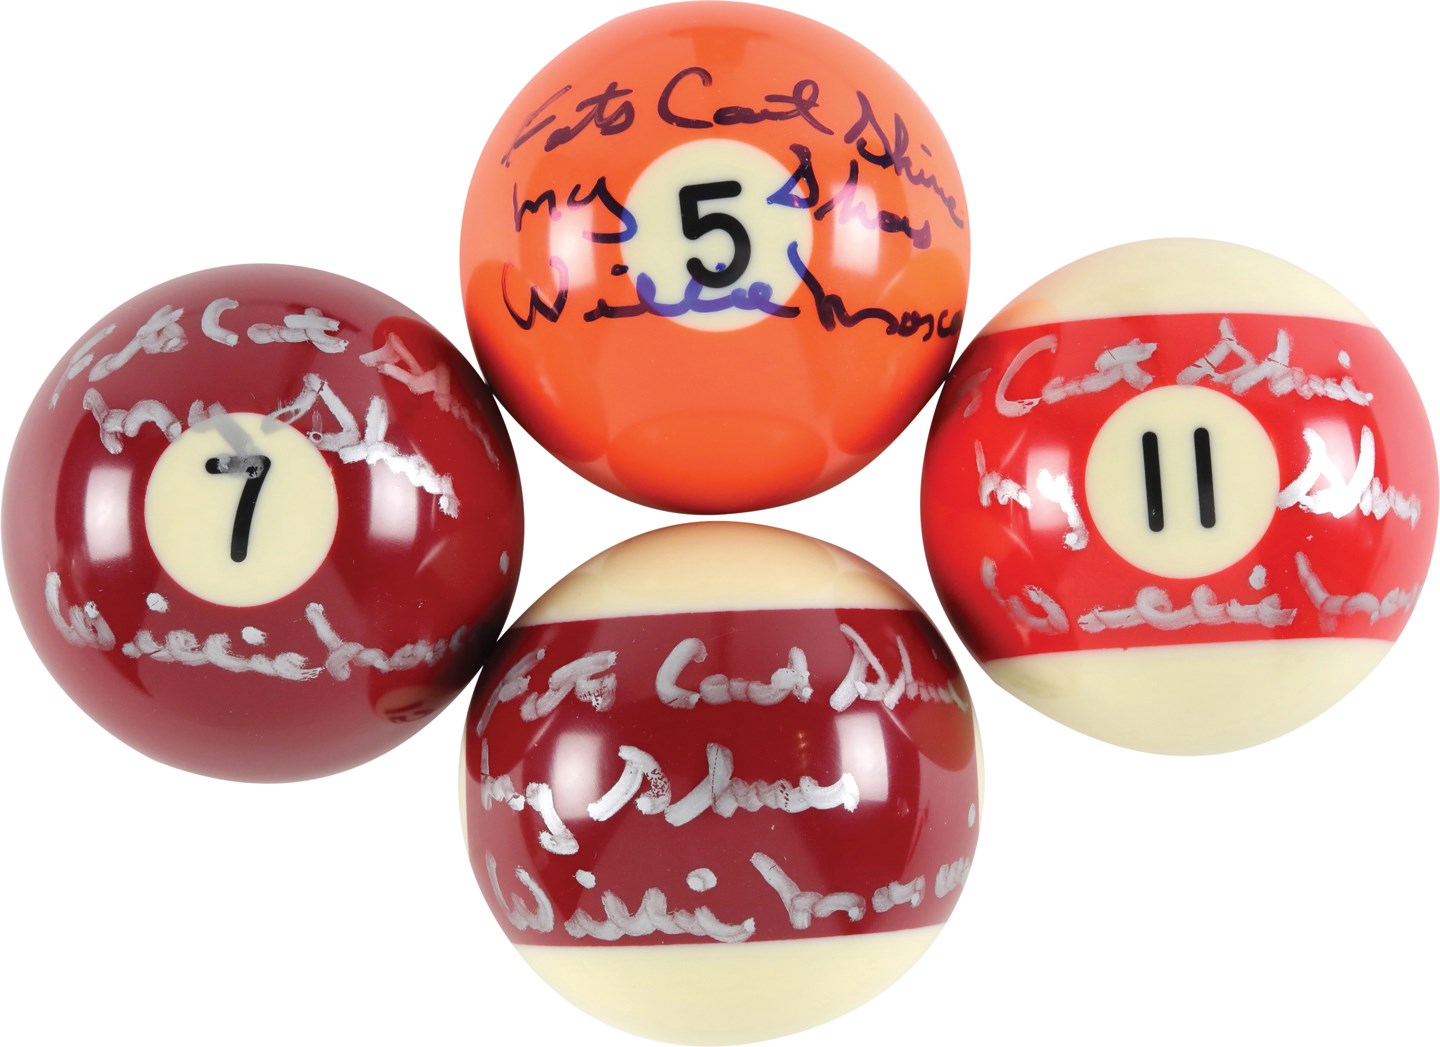 Olympics and All Sports - Willie Mosconi "Fats Can't Shine My Shoes" Signed Pool Ball Collection (4) PSA/DNA